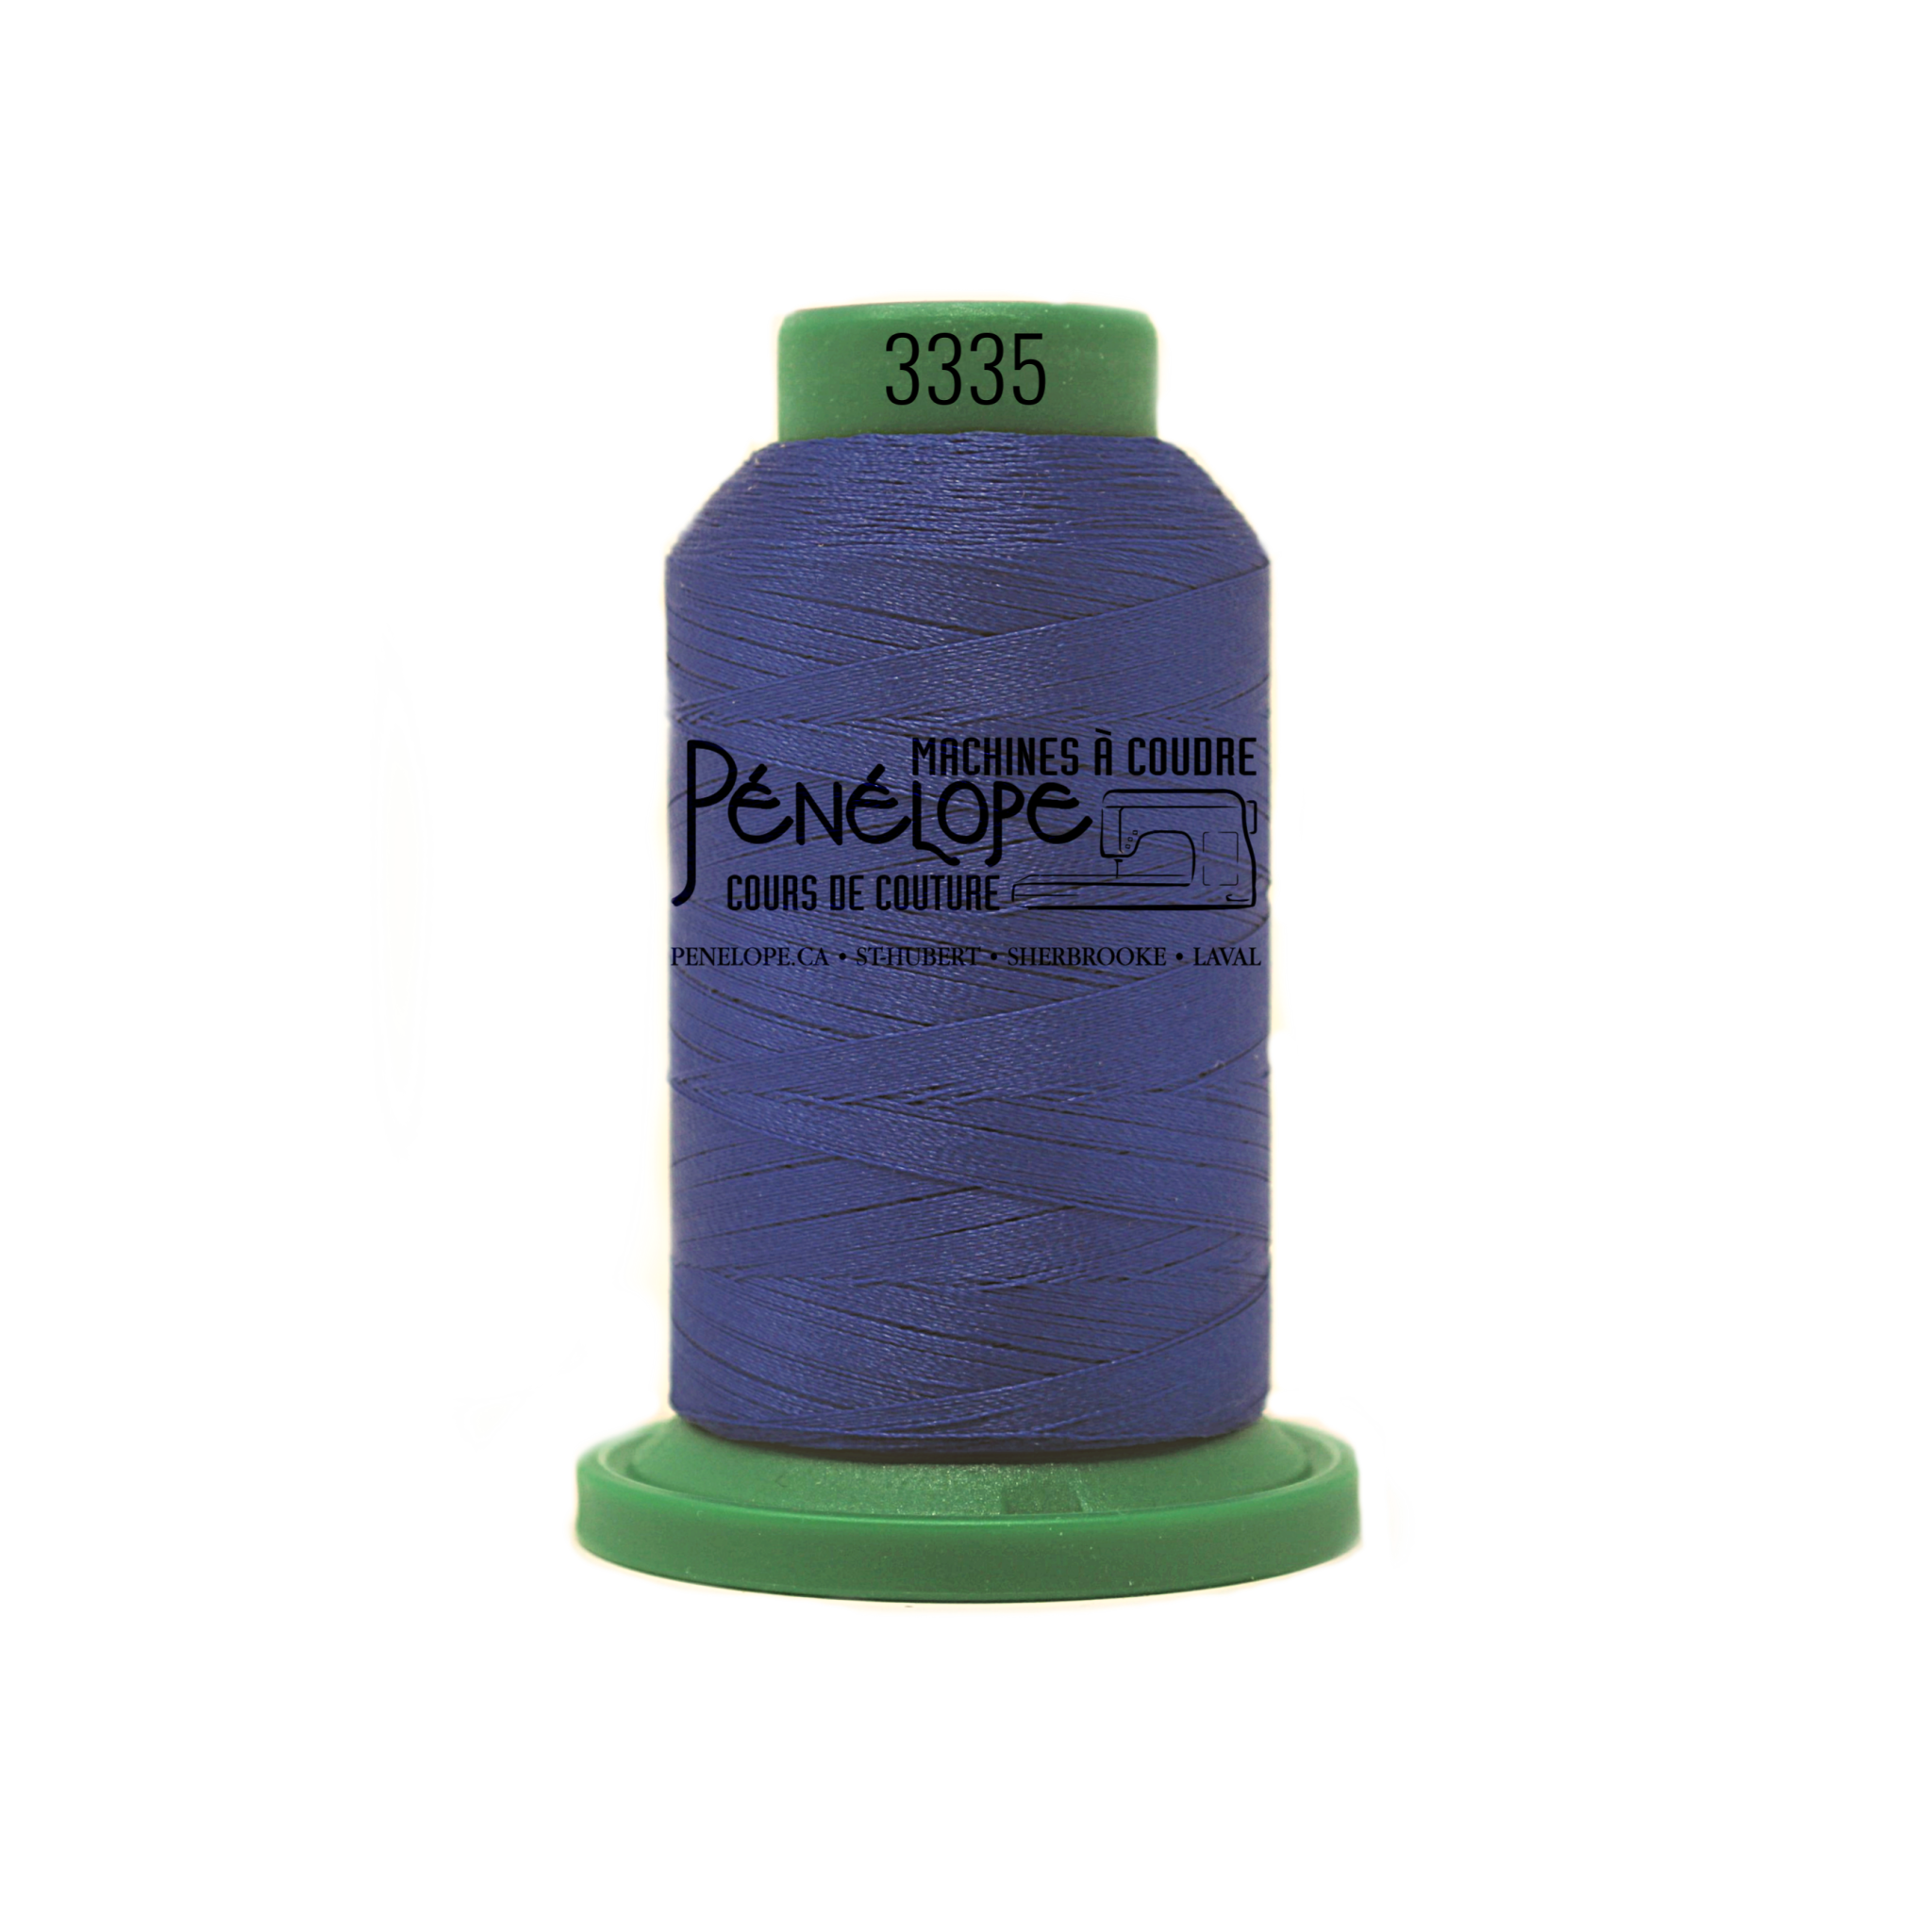 Isacord Isacord thread 3335 for embroidery and sewing